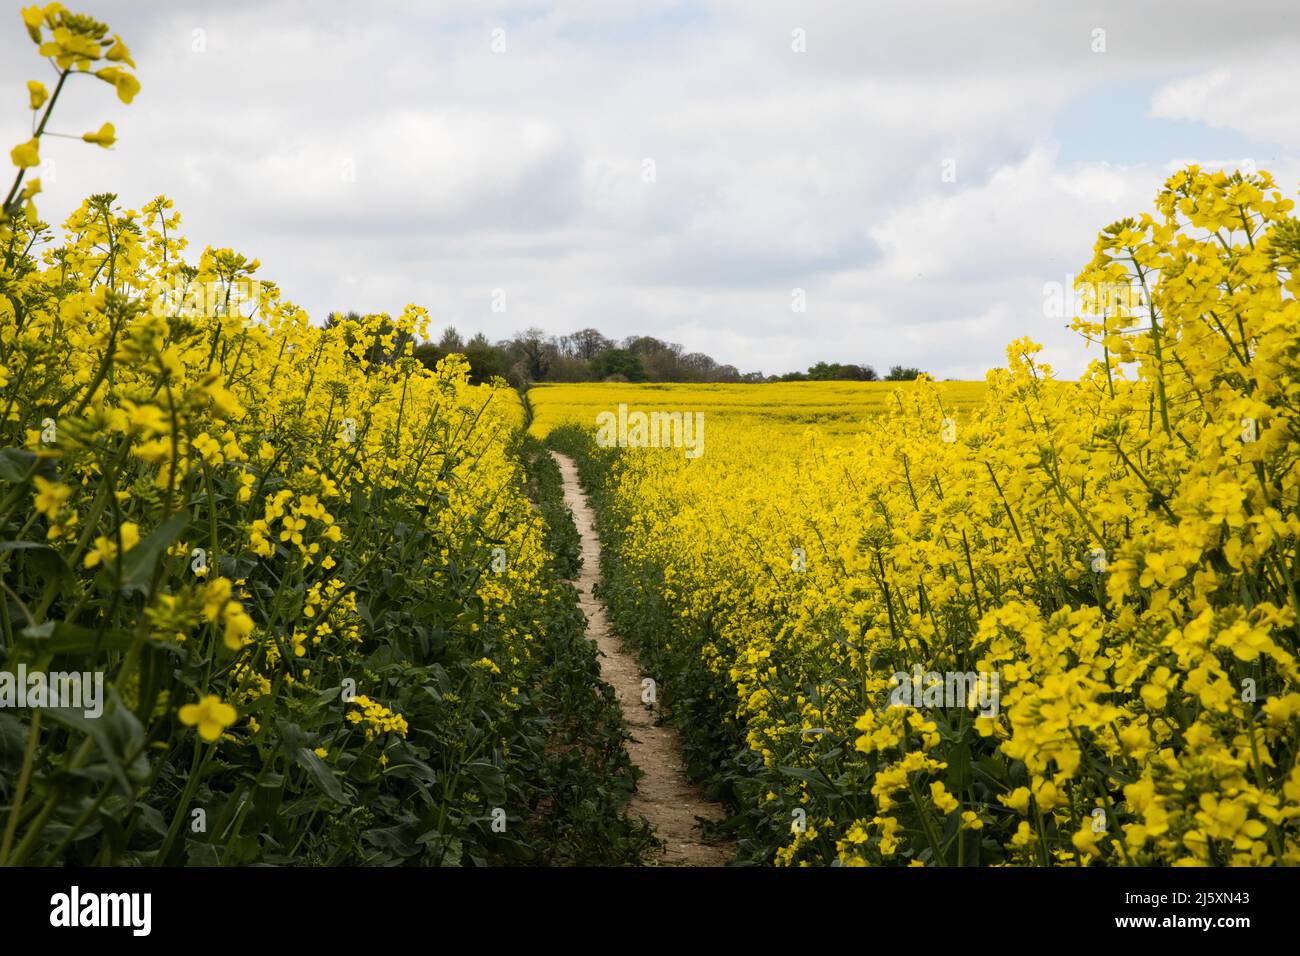 West Ilsley, UK. 25th April, 2022. A large field of bright yellow rapeseed (Brassica napus) is pictured in full bloom. Some UK supermarkets have begun rationing supplies of cooking oils such as sunflower oil and rapeseed oil due to shortages caused by Russia's invasion of Ukraine. The UK is roughly 50% self-sufficient for rapeseed oil. Credit: Mark Kerrison/Alamy Live News Stock Photo